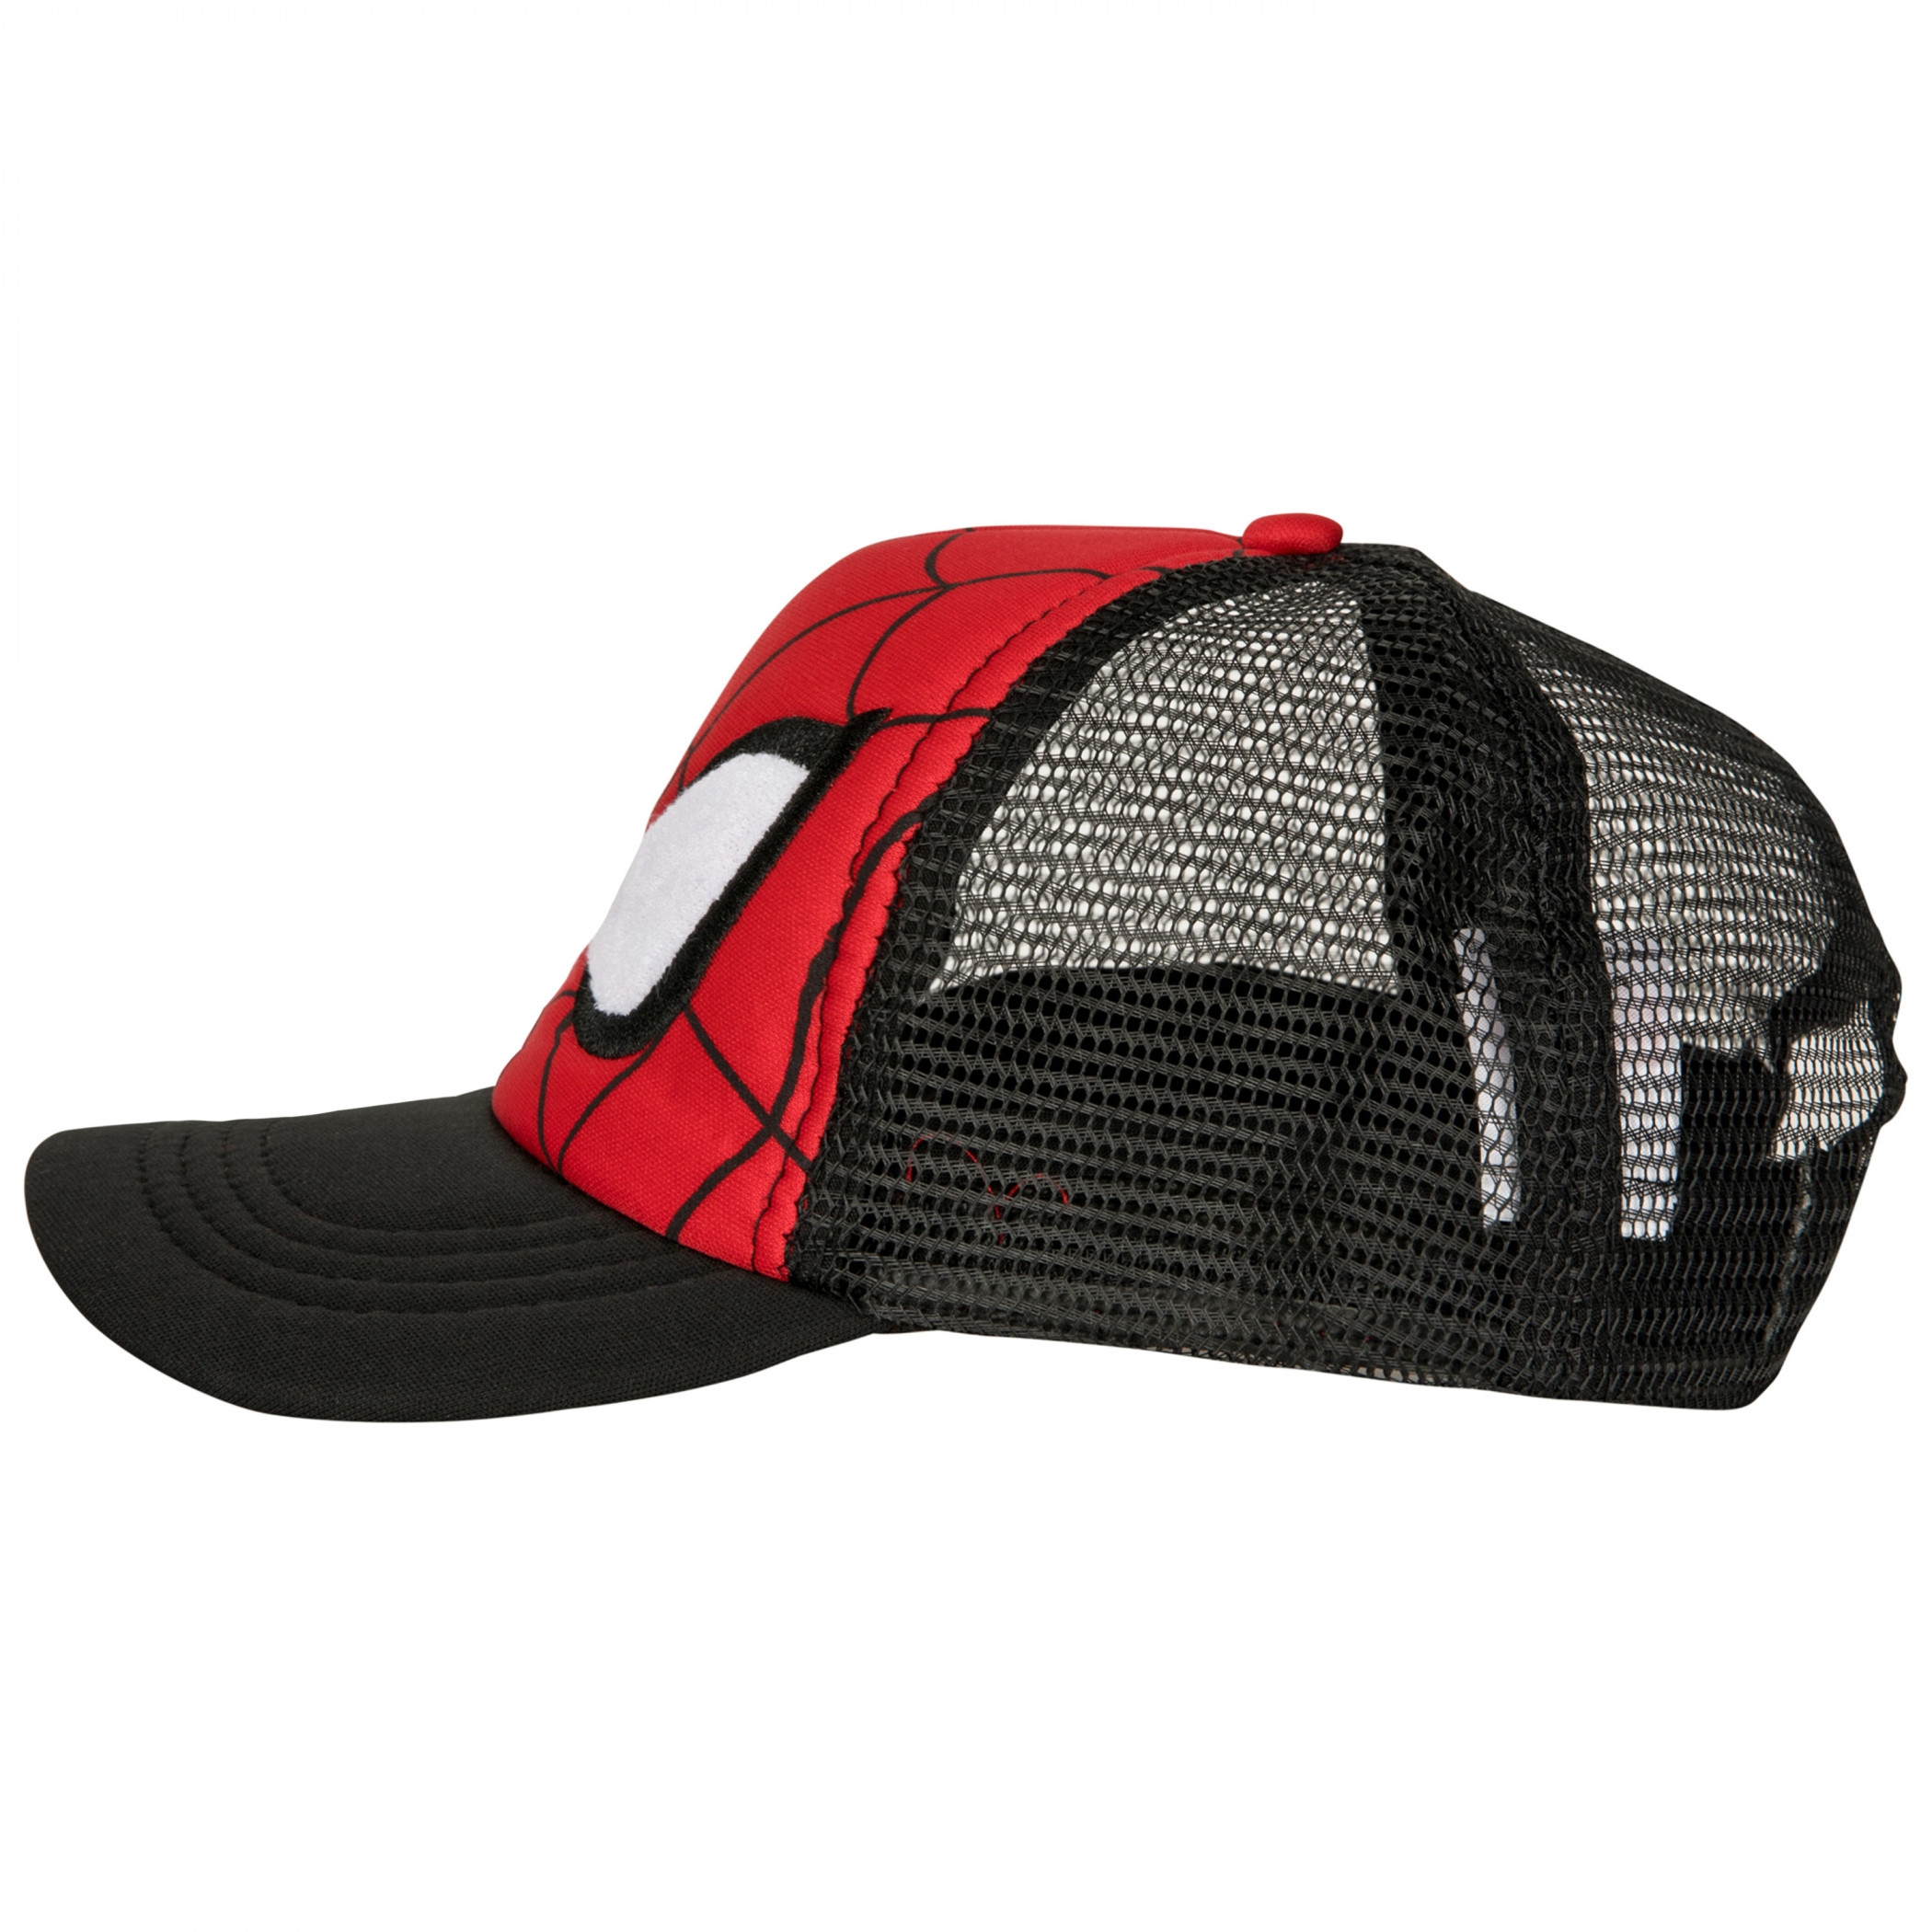 Spider-Man Glowing Eyes Embroidered Hat